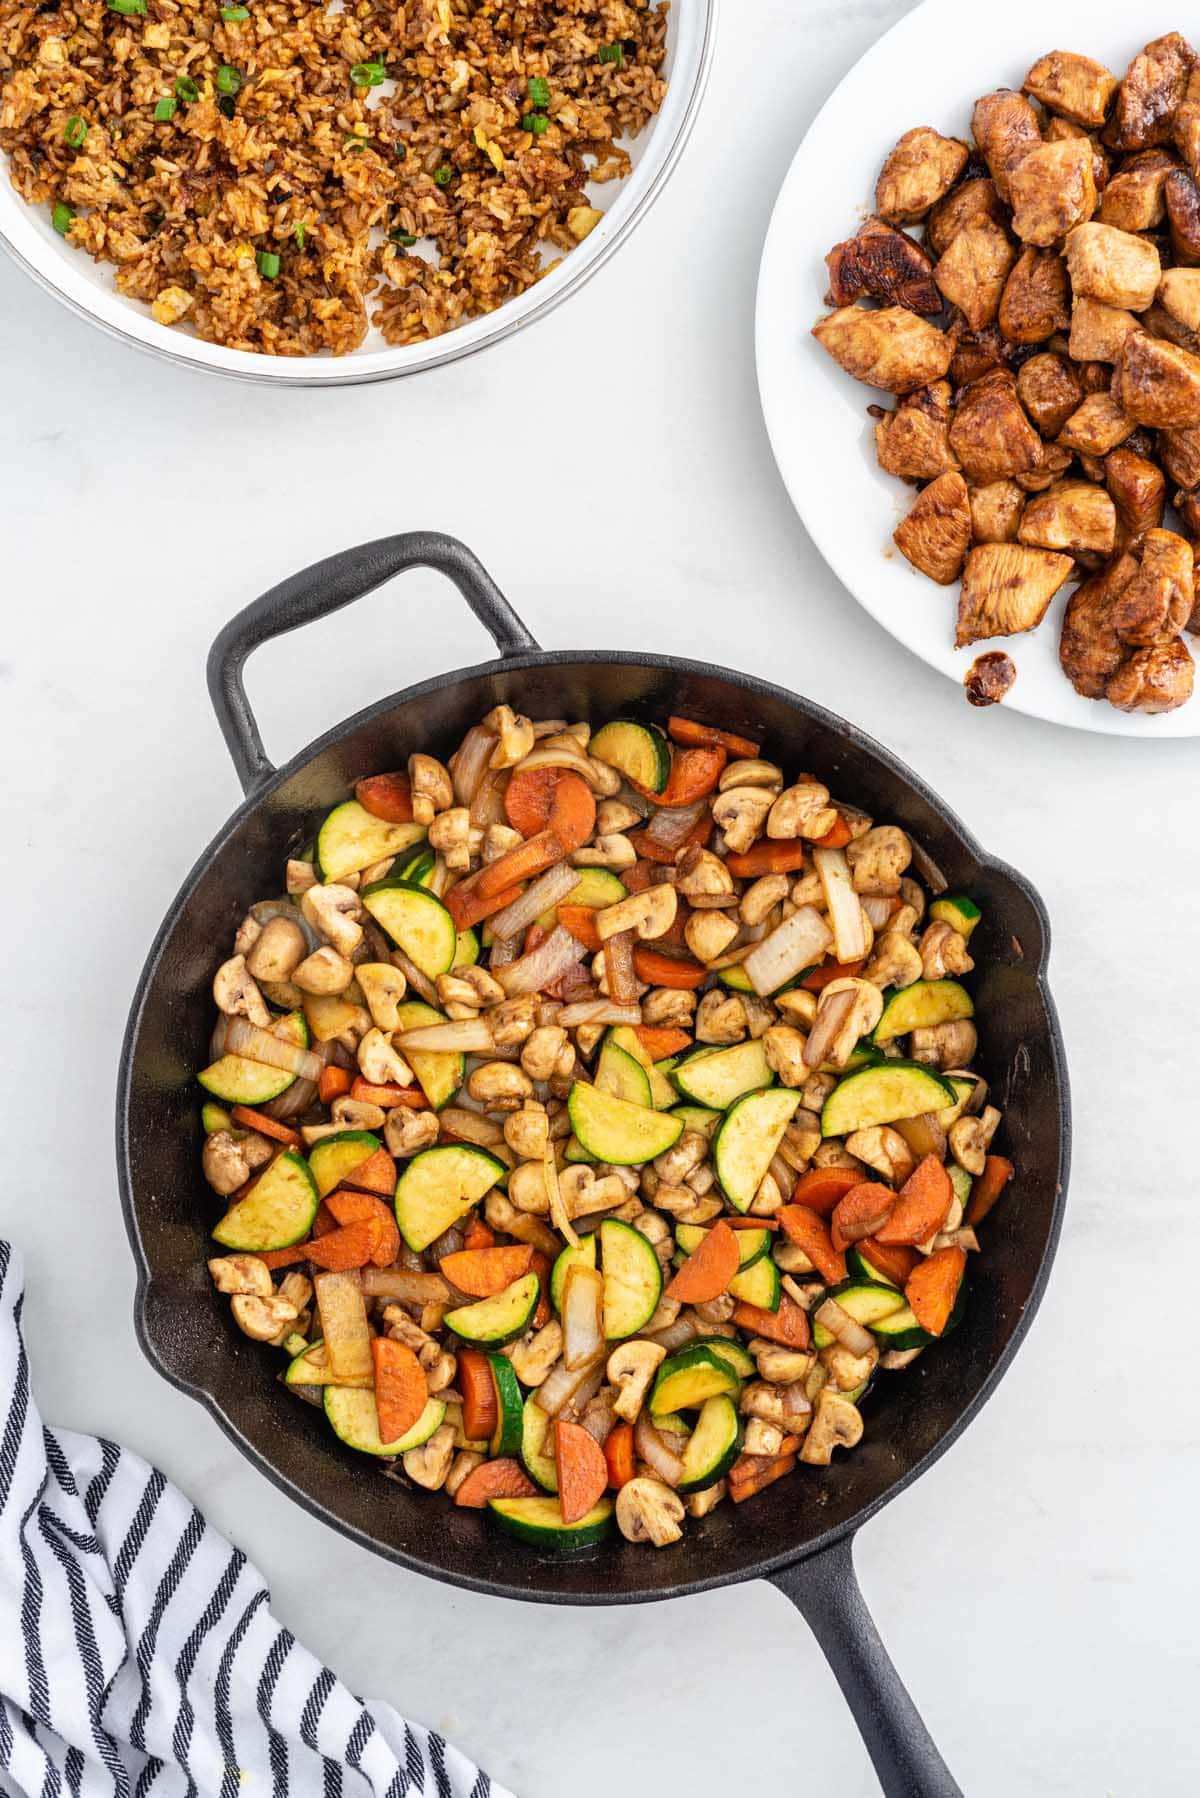 cook the vegetables in the skillet